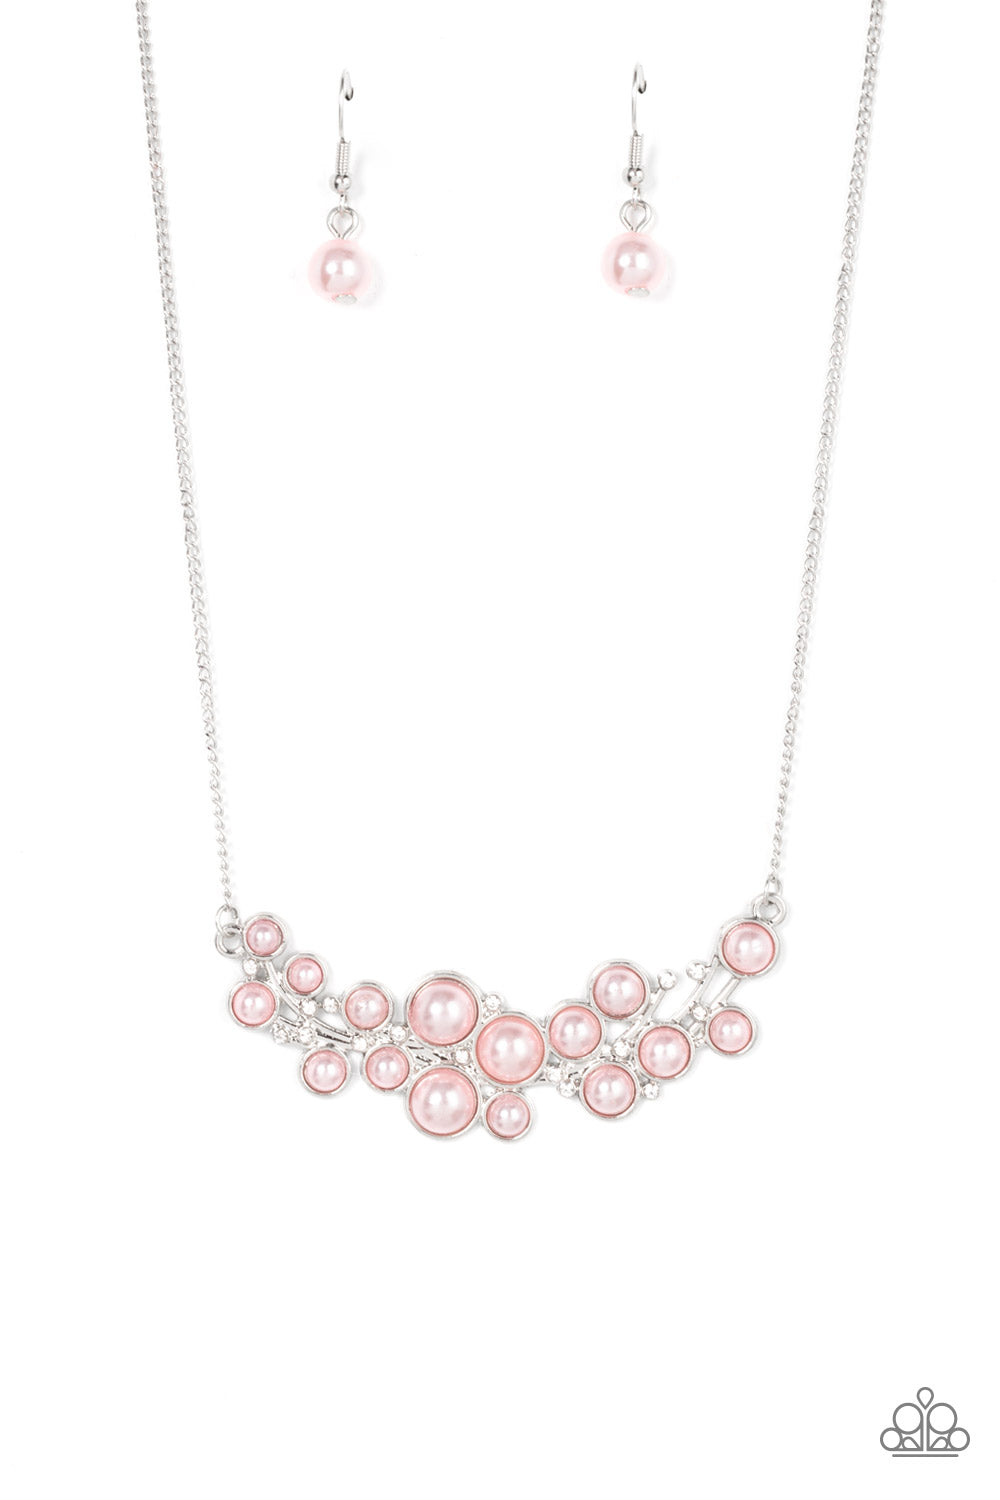 My Yacht or Yours? - pink - Paparazzi necklace